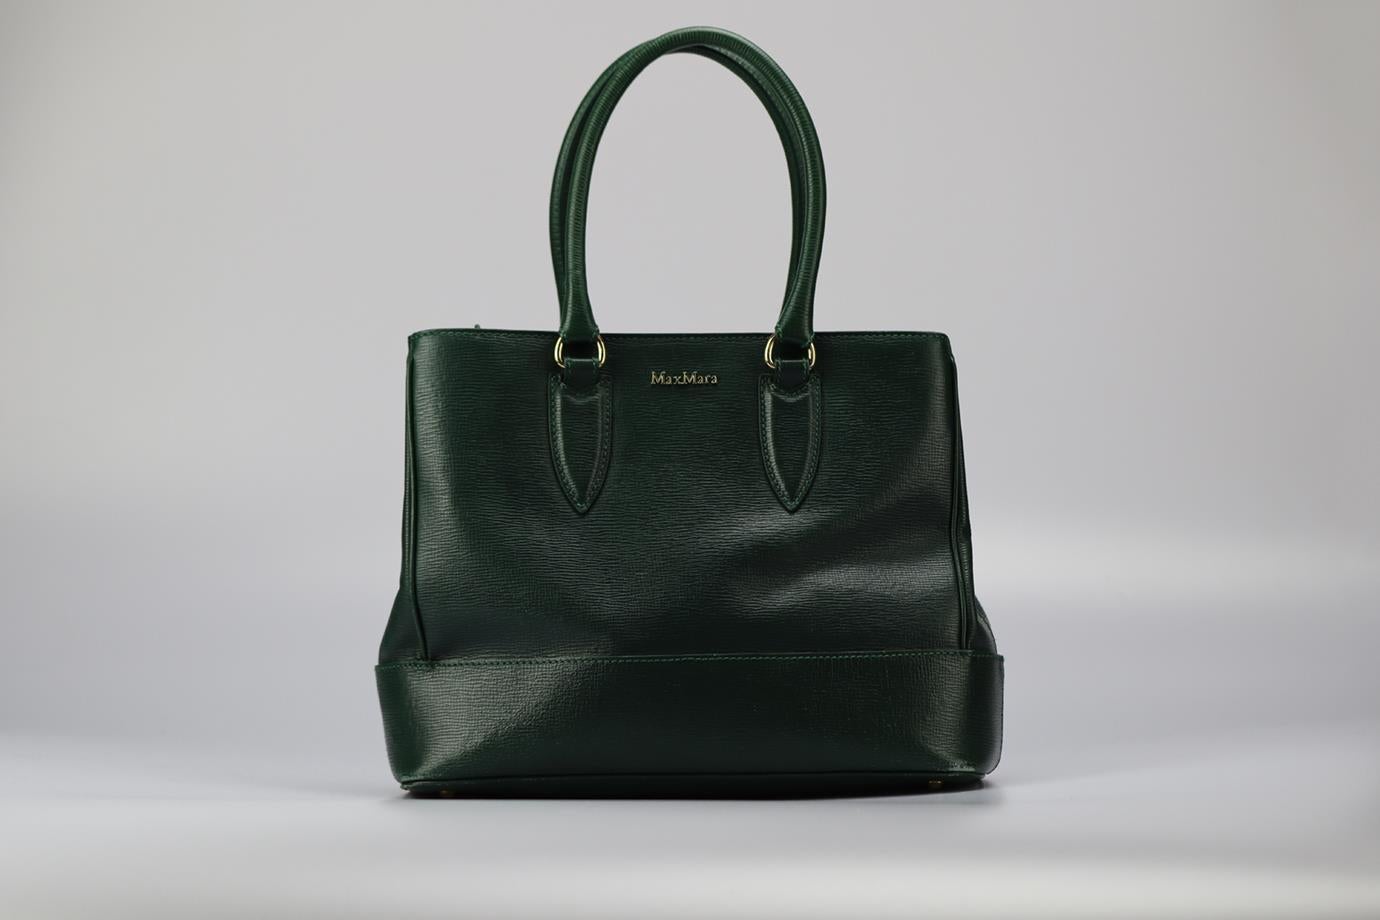 Max Mara Textured Leather Tote Bag. Green. Open Top. Does not come with - dustbag or box. Condition: Used. Good condition - Scuff marks and marks to exterior material and corners. Some wear to edges. Some marks to interior material; see pictures.
